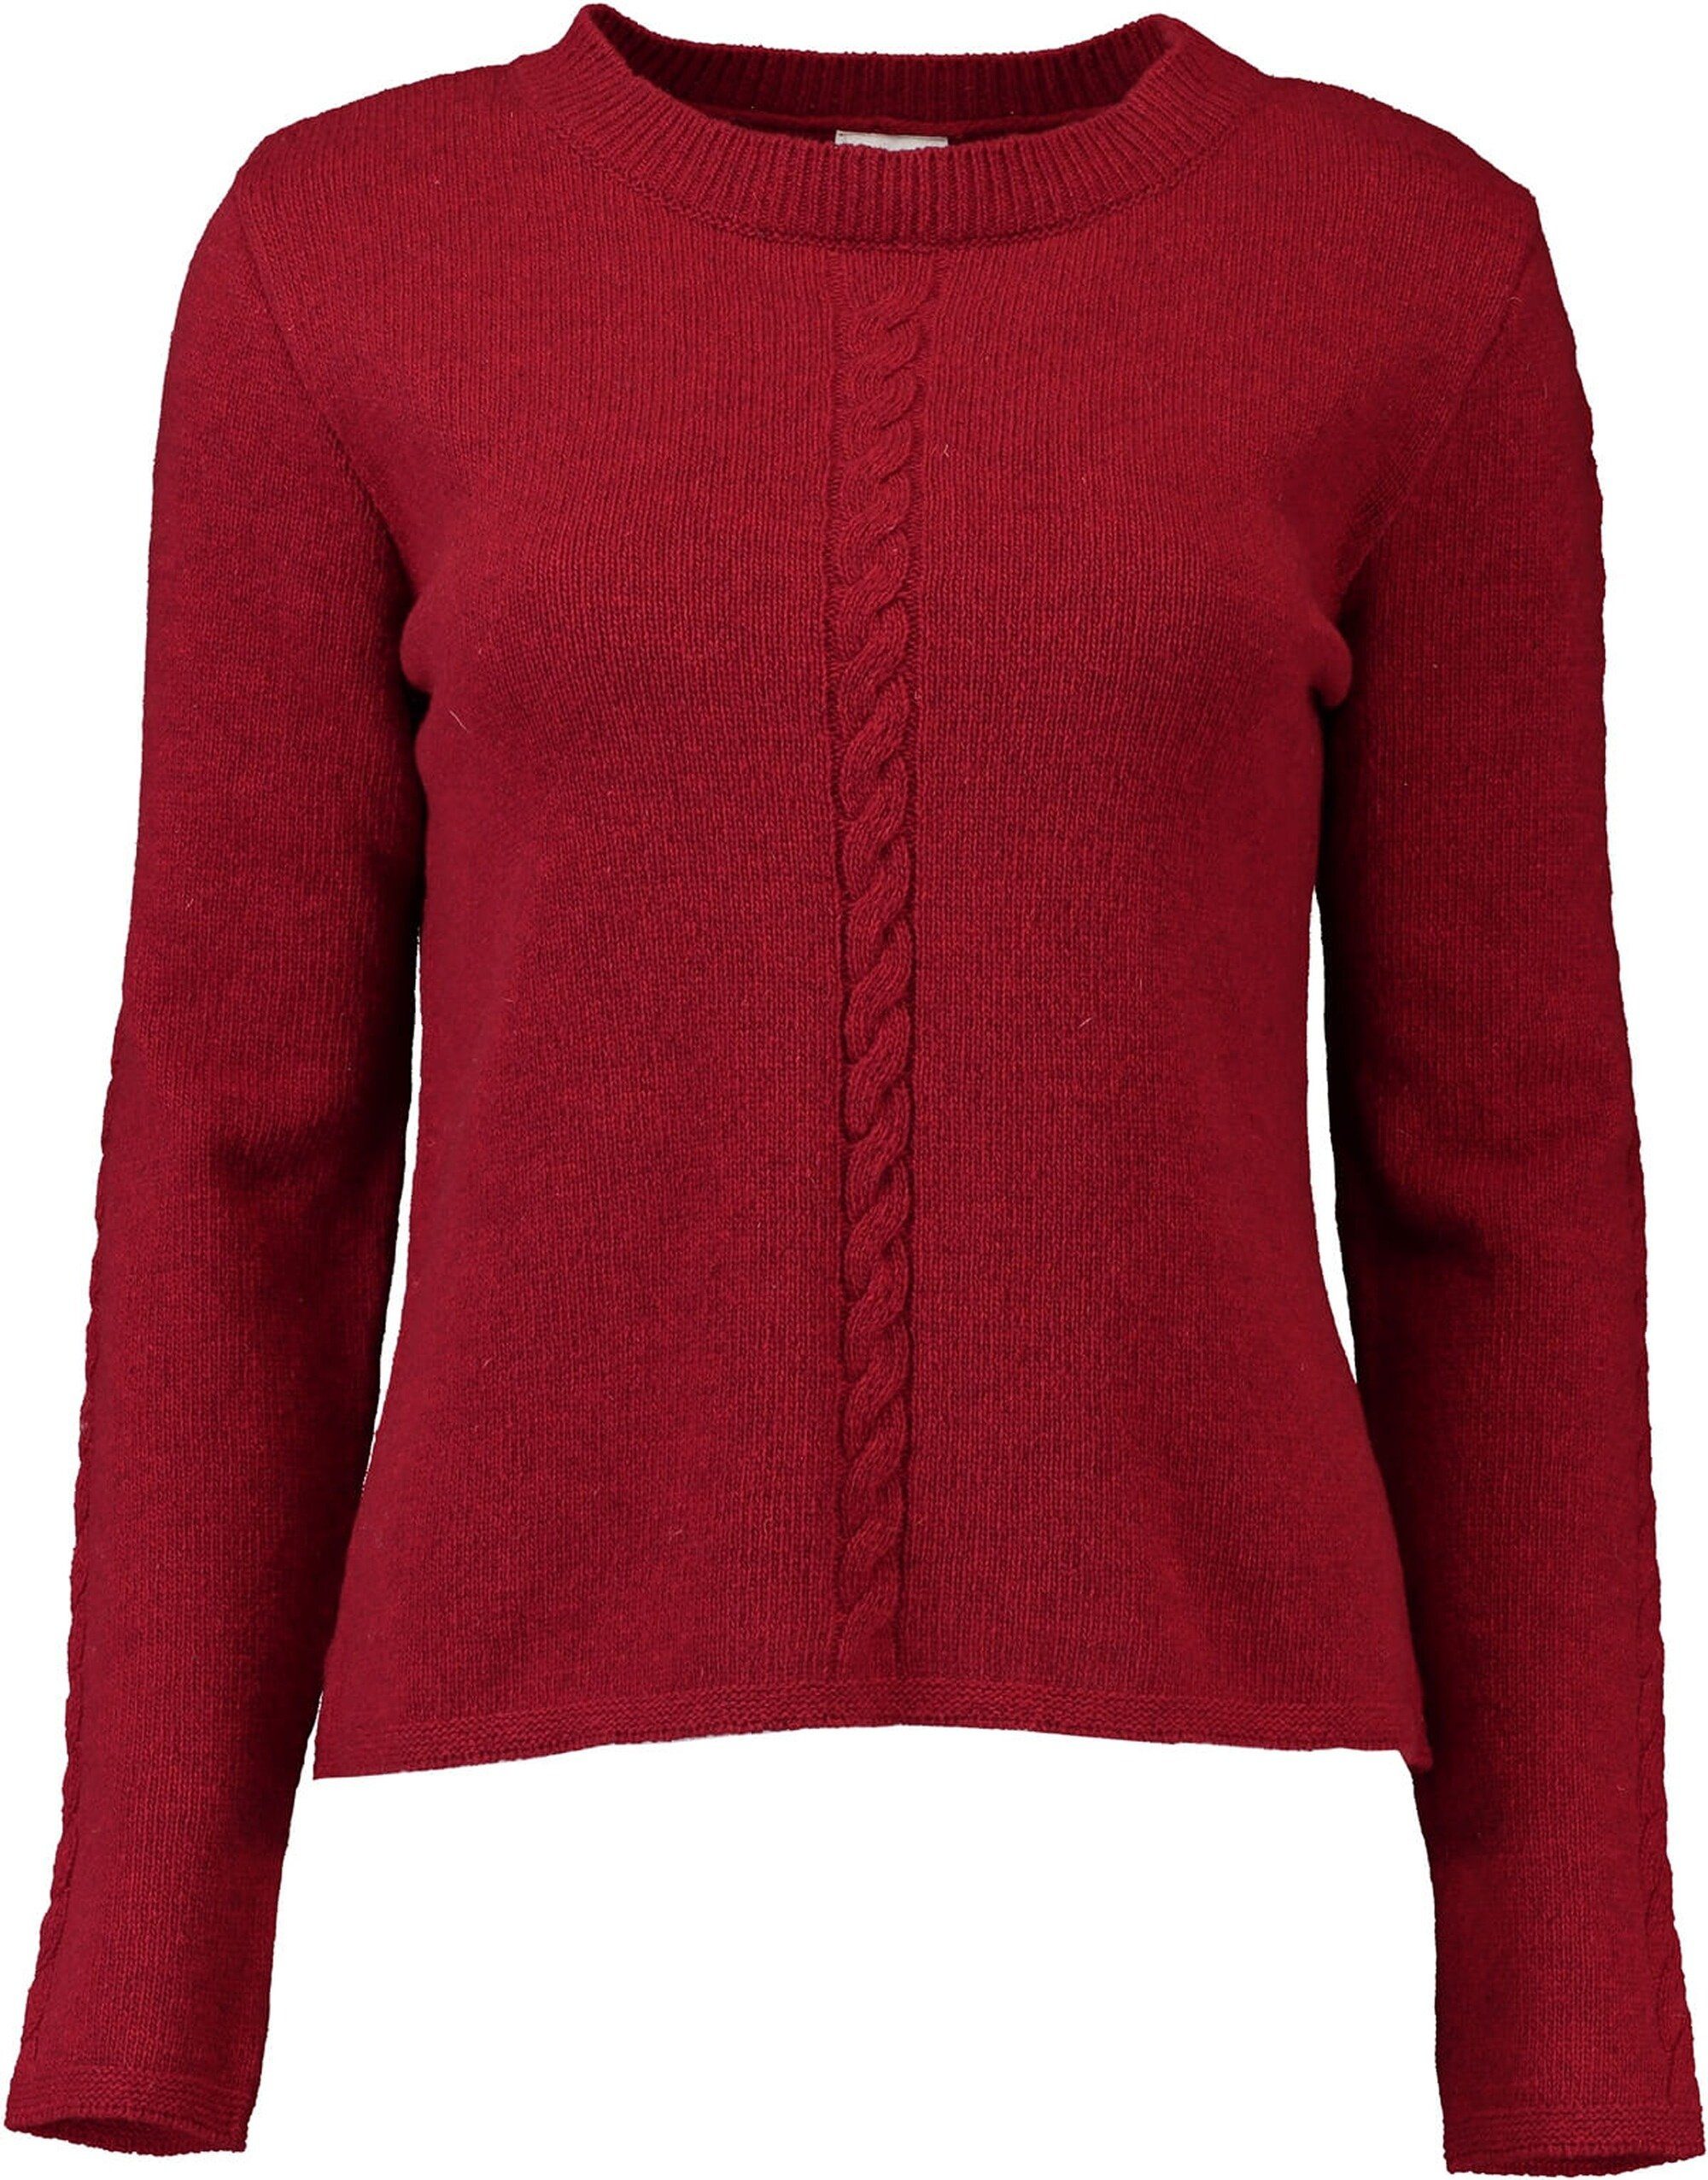 H. Moser Strickpullover h.moser rot Wollmix-Pullover